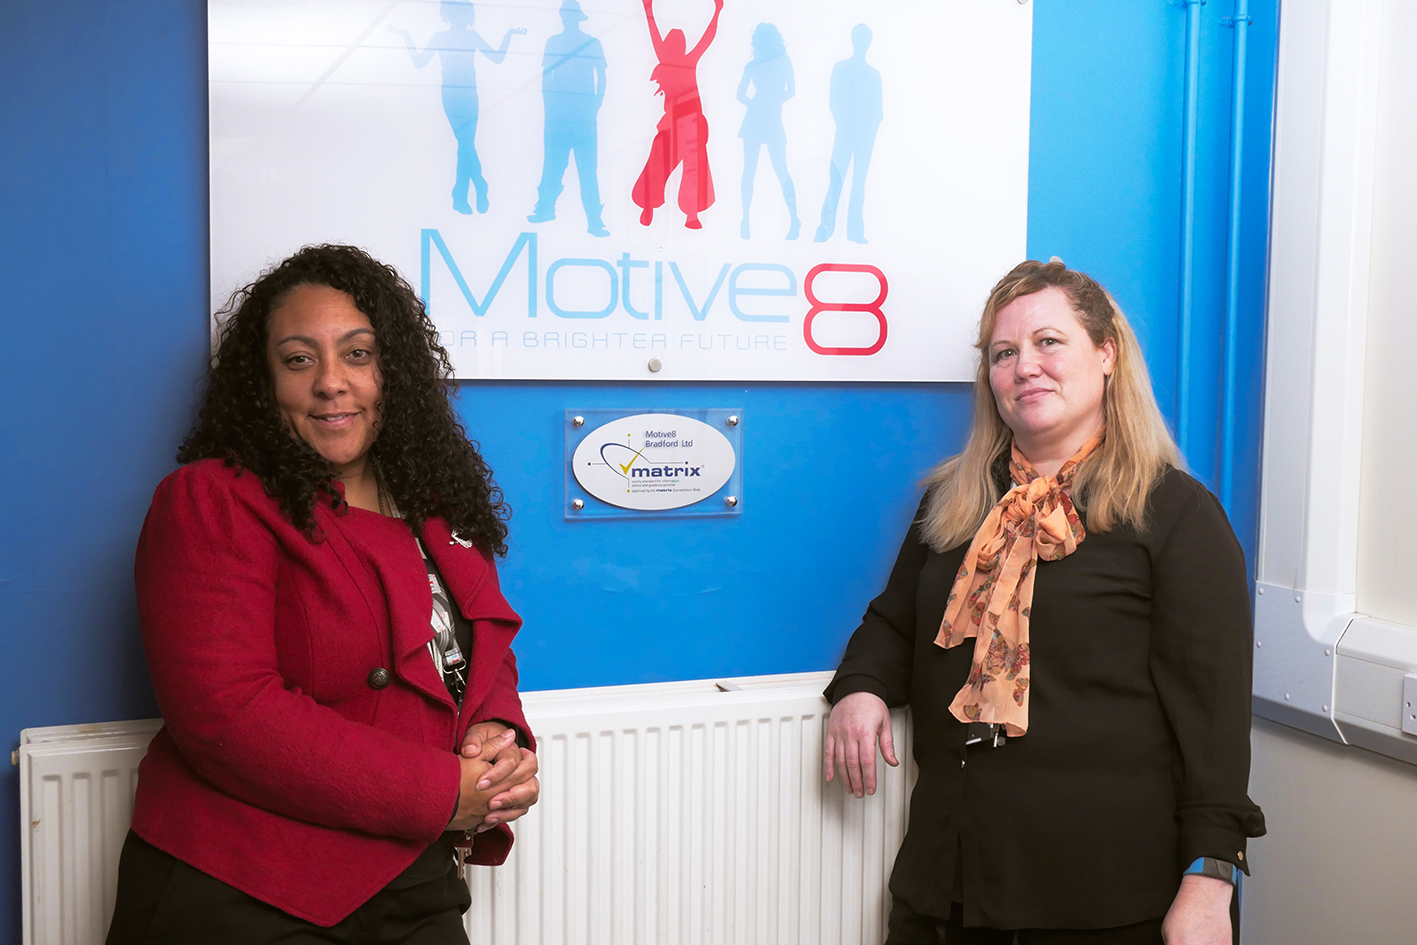 Motive8 Directors Melissa Simpson (left) and Moy Grange stand next to the Motive8 College logo